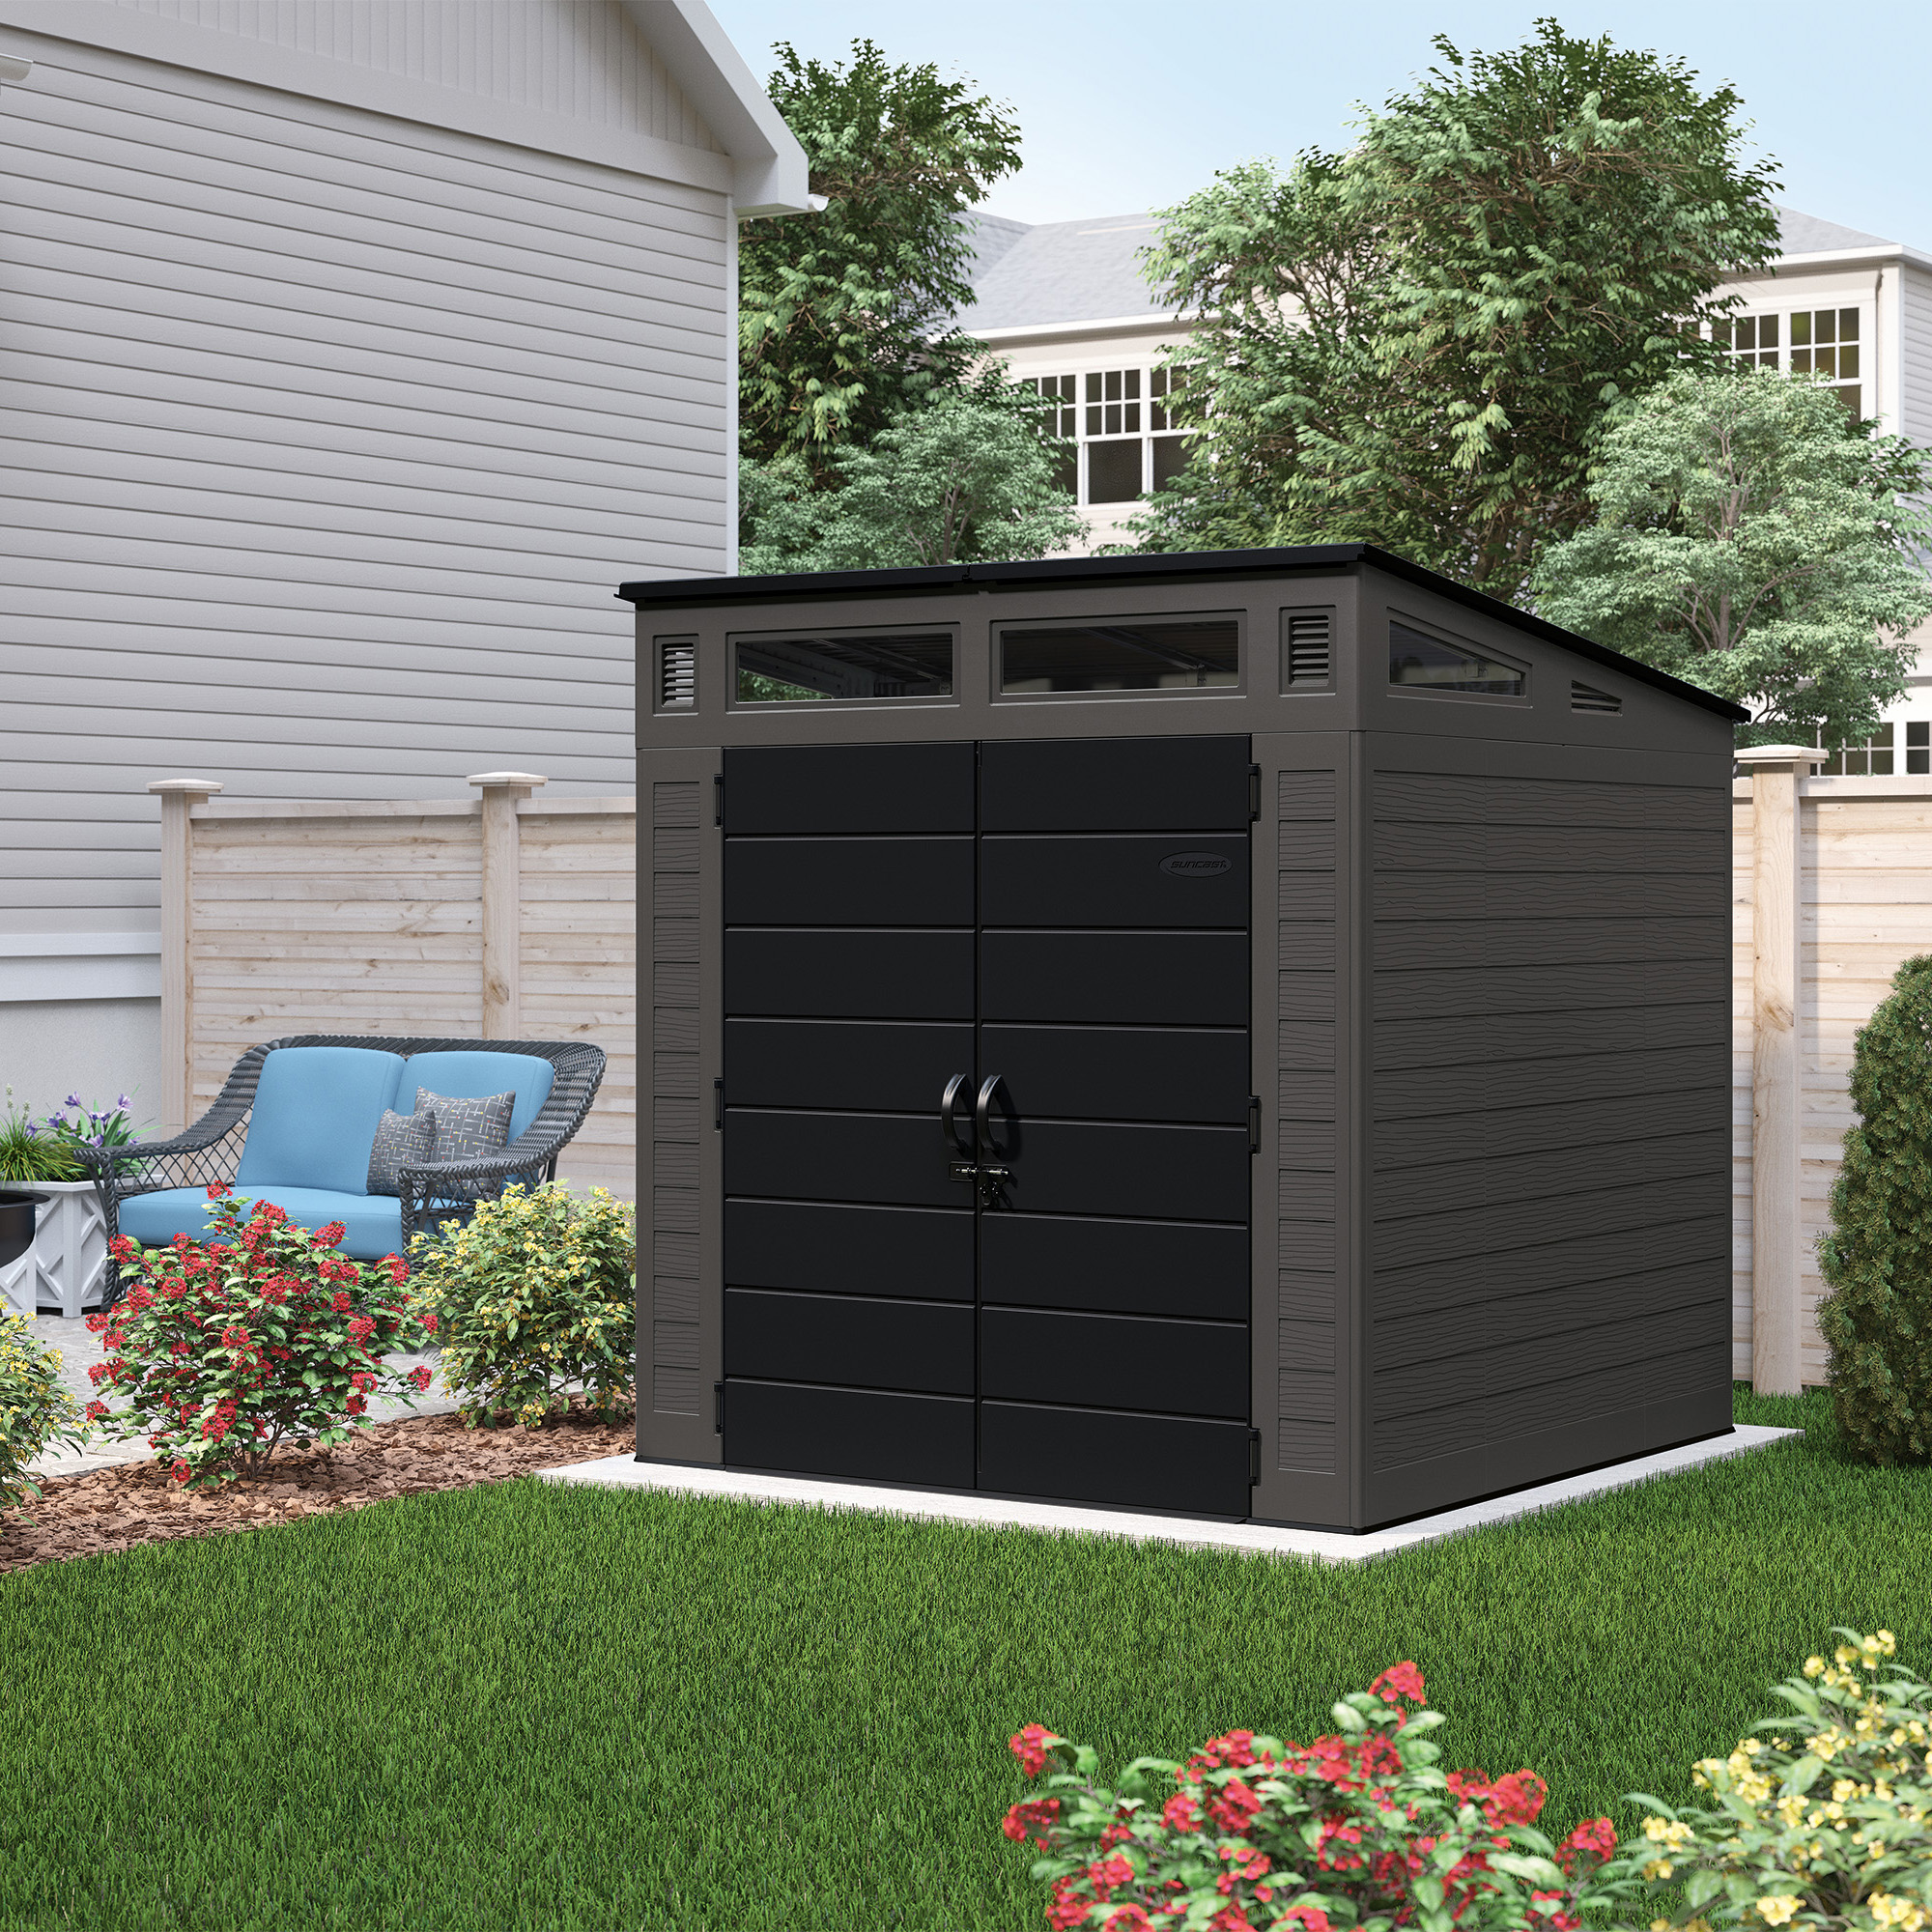 Suncast Resin Modernist Outdoor Storage Shed, Black and Gray, 86.5 in D x 89.5 in H x 87.5 in W - image 4 of 5